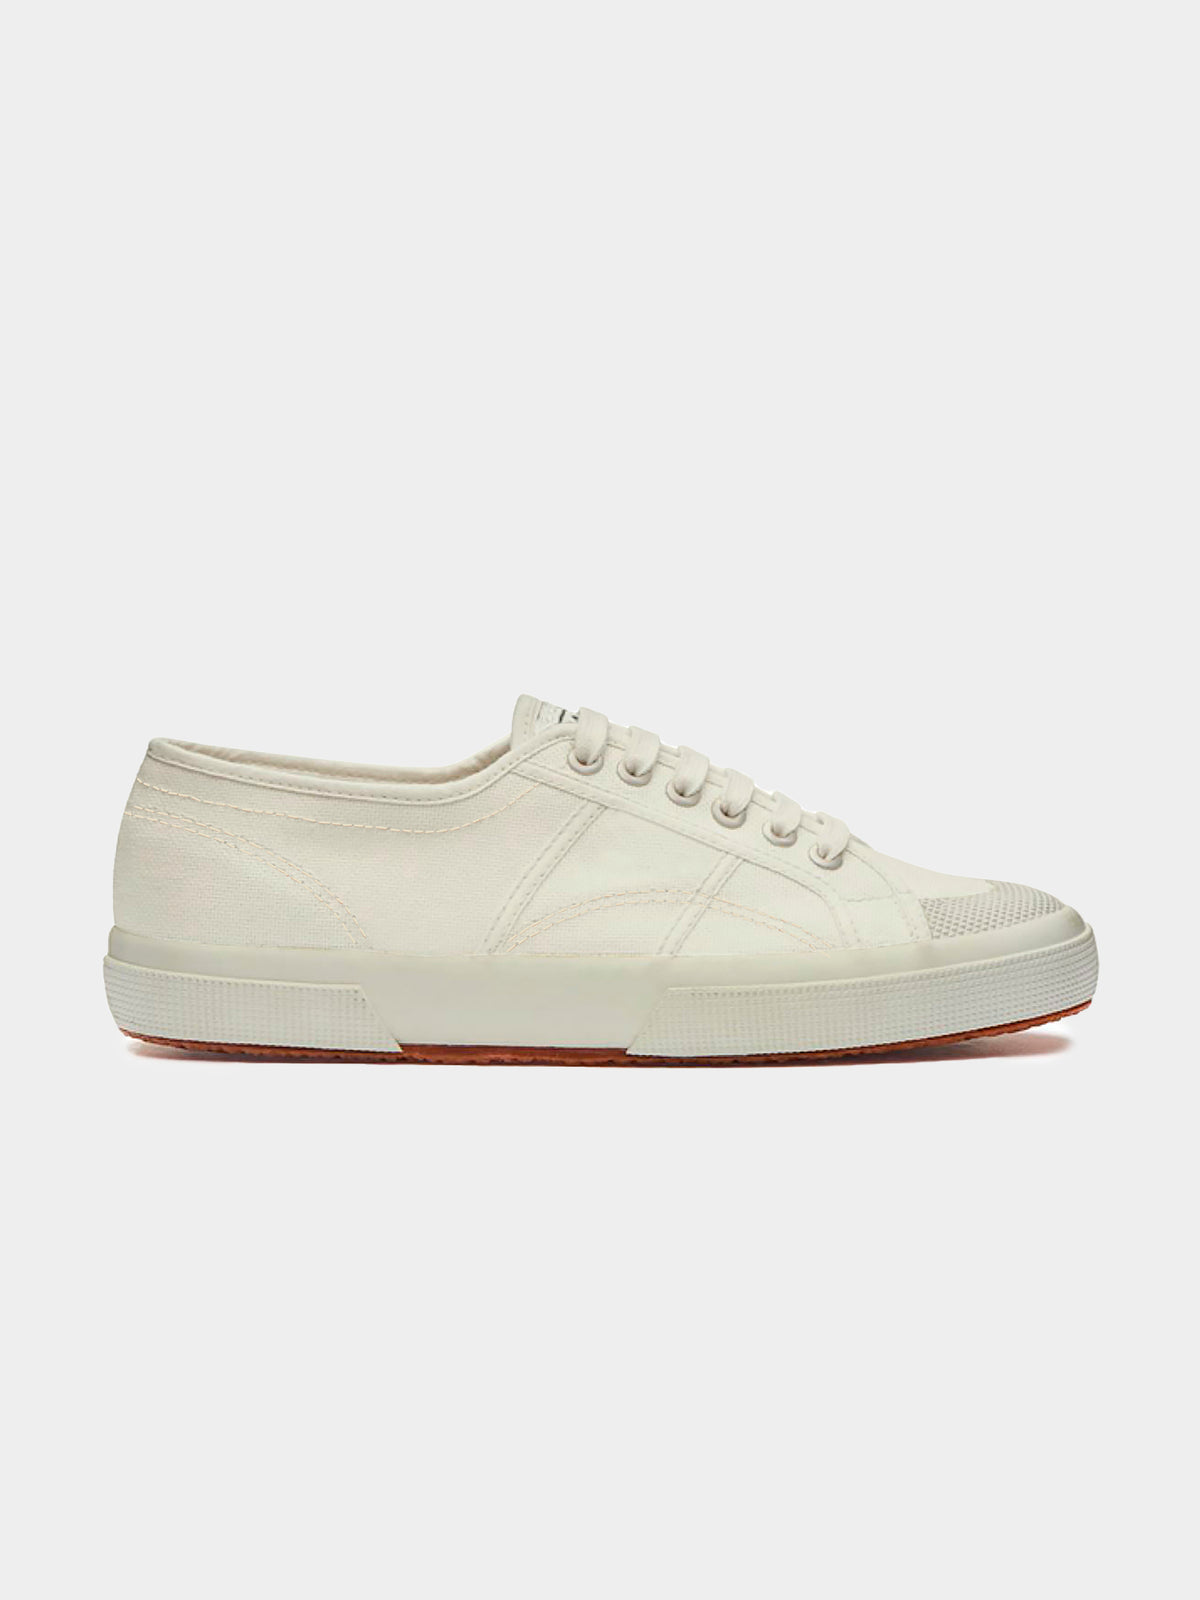 Unisex 2390 Military Sneakers in White Marshmallow &amp; Grey